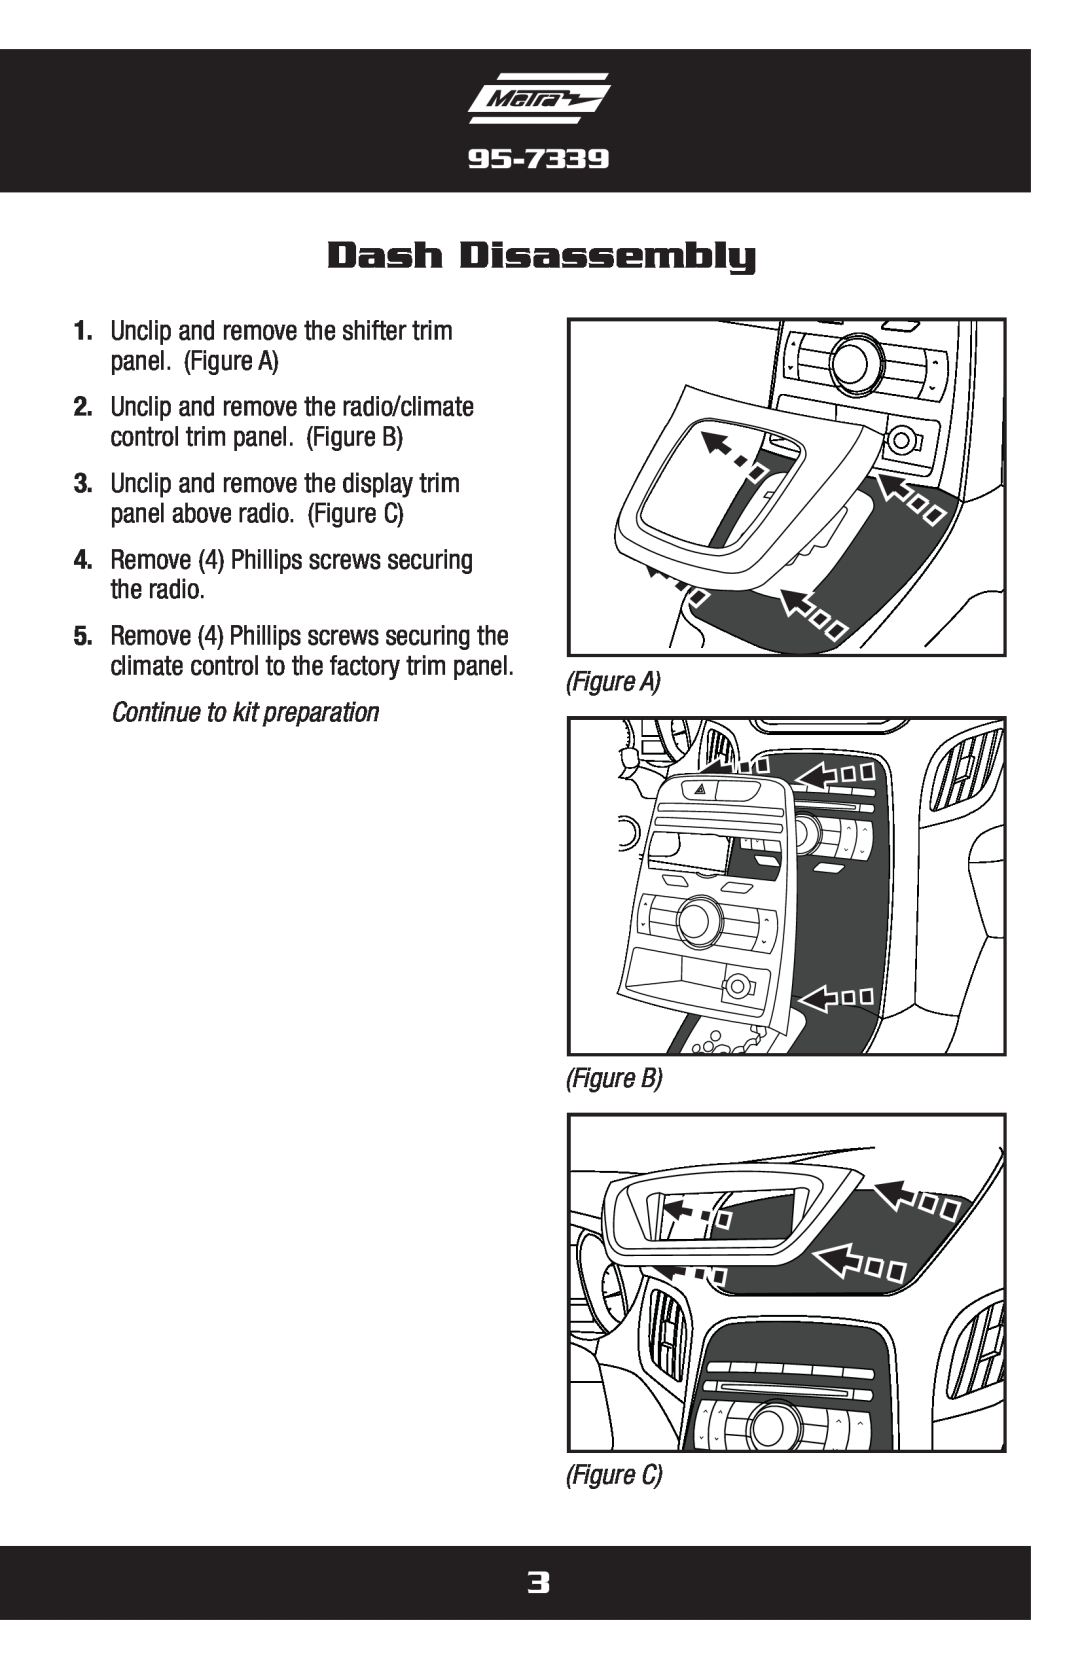 Metra Electronics 95-7339B Dash Disassembly, Unclip and remove the shifter trim panel. Figure A, Figure B Figure C 